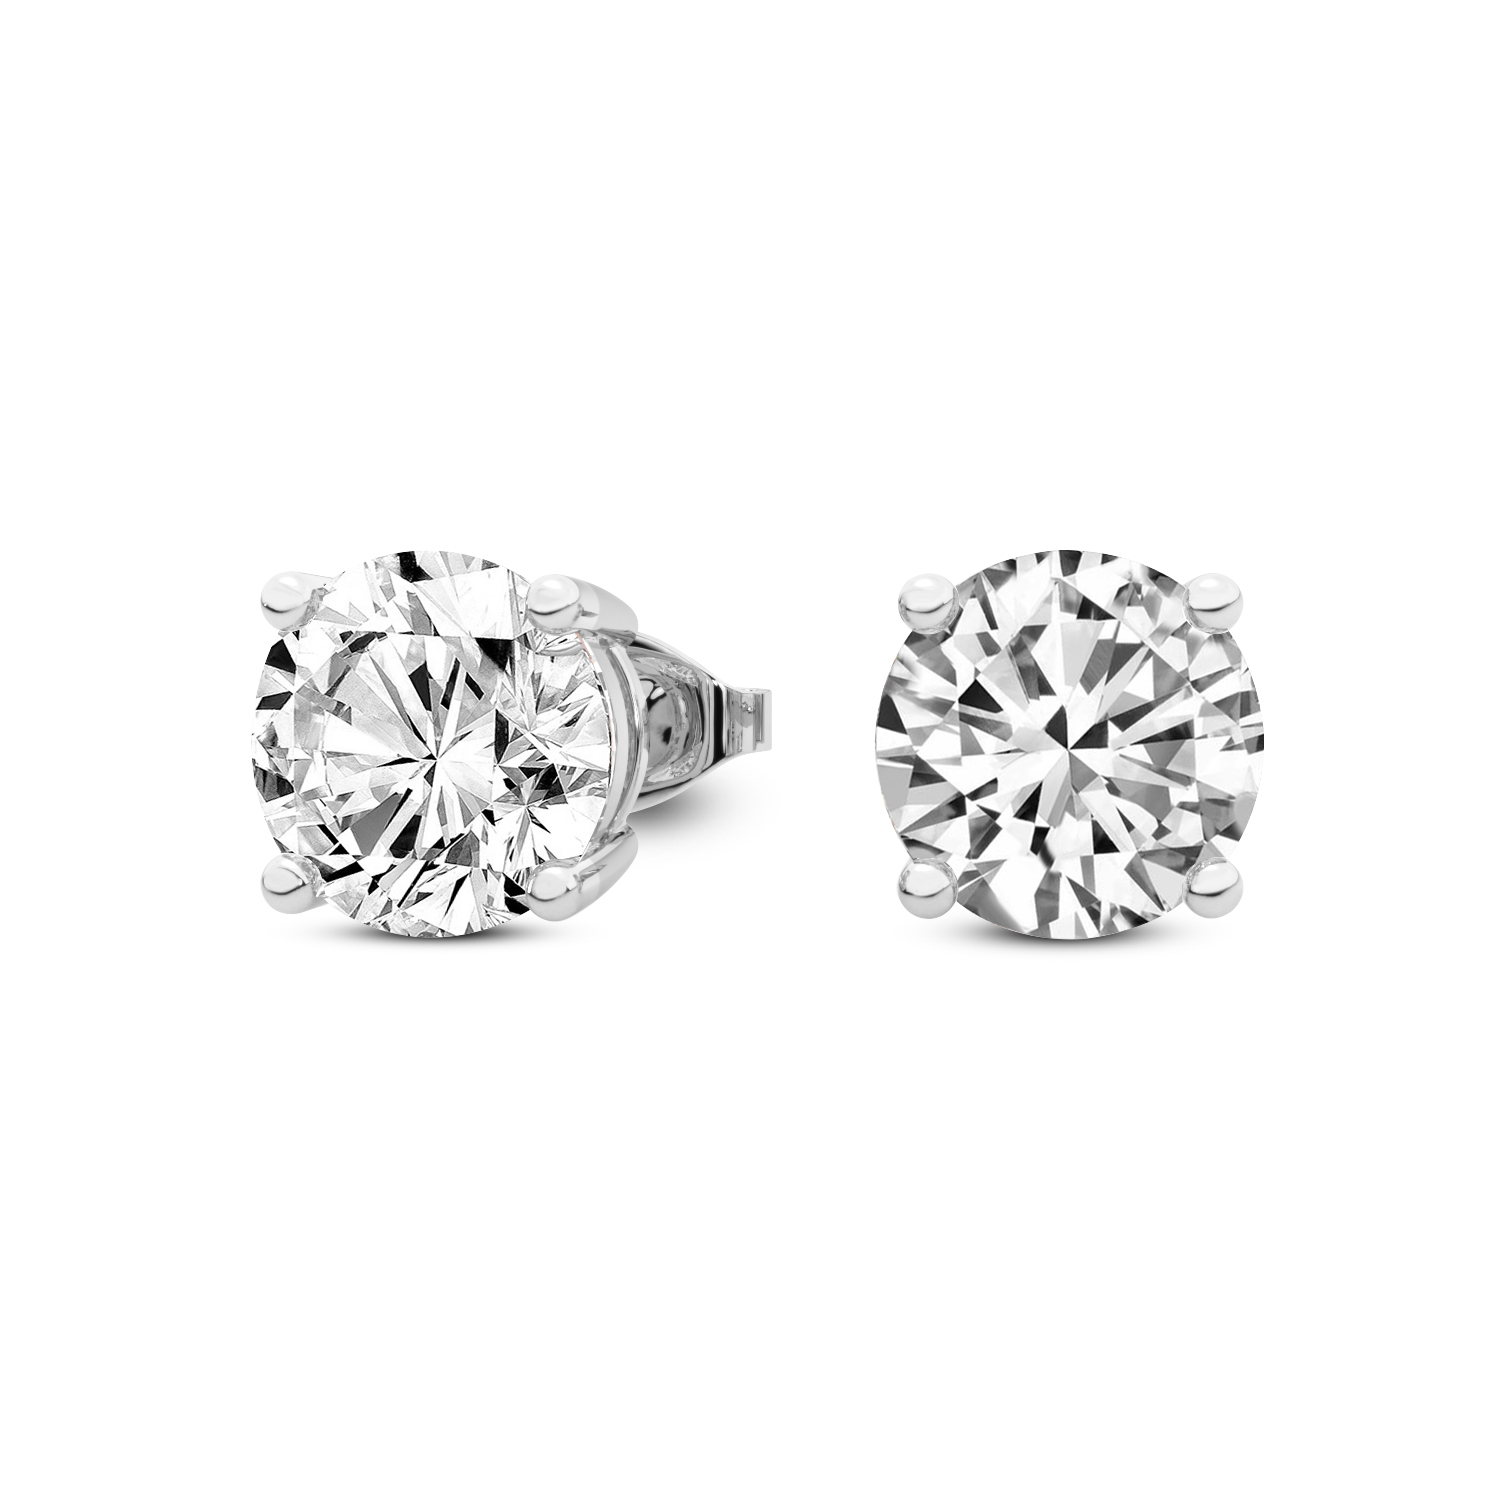 4 Prong Round Lab Diamond Stud Earrings white gold earring, small right view